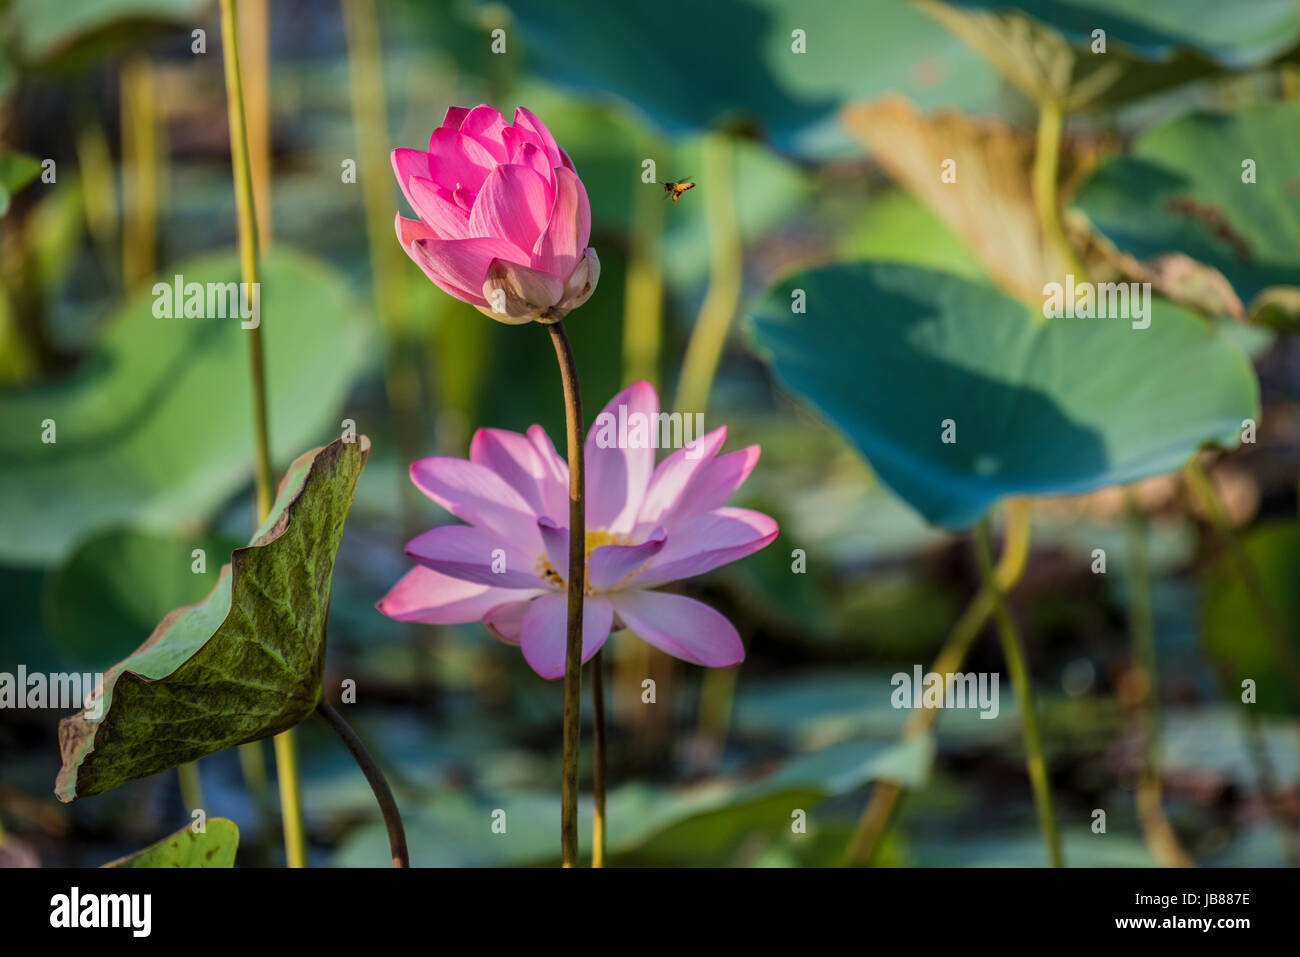 Pink Lotus or waterlily blossom and leaves in lake Stock Photo